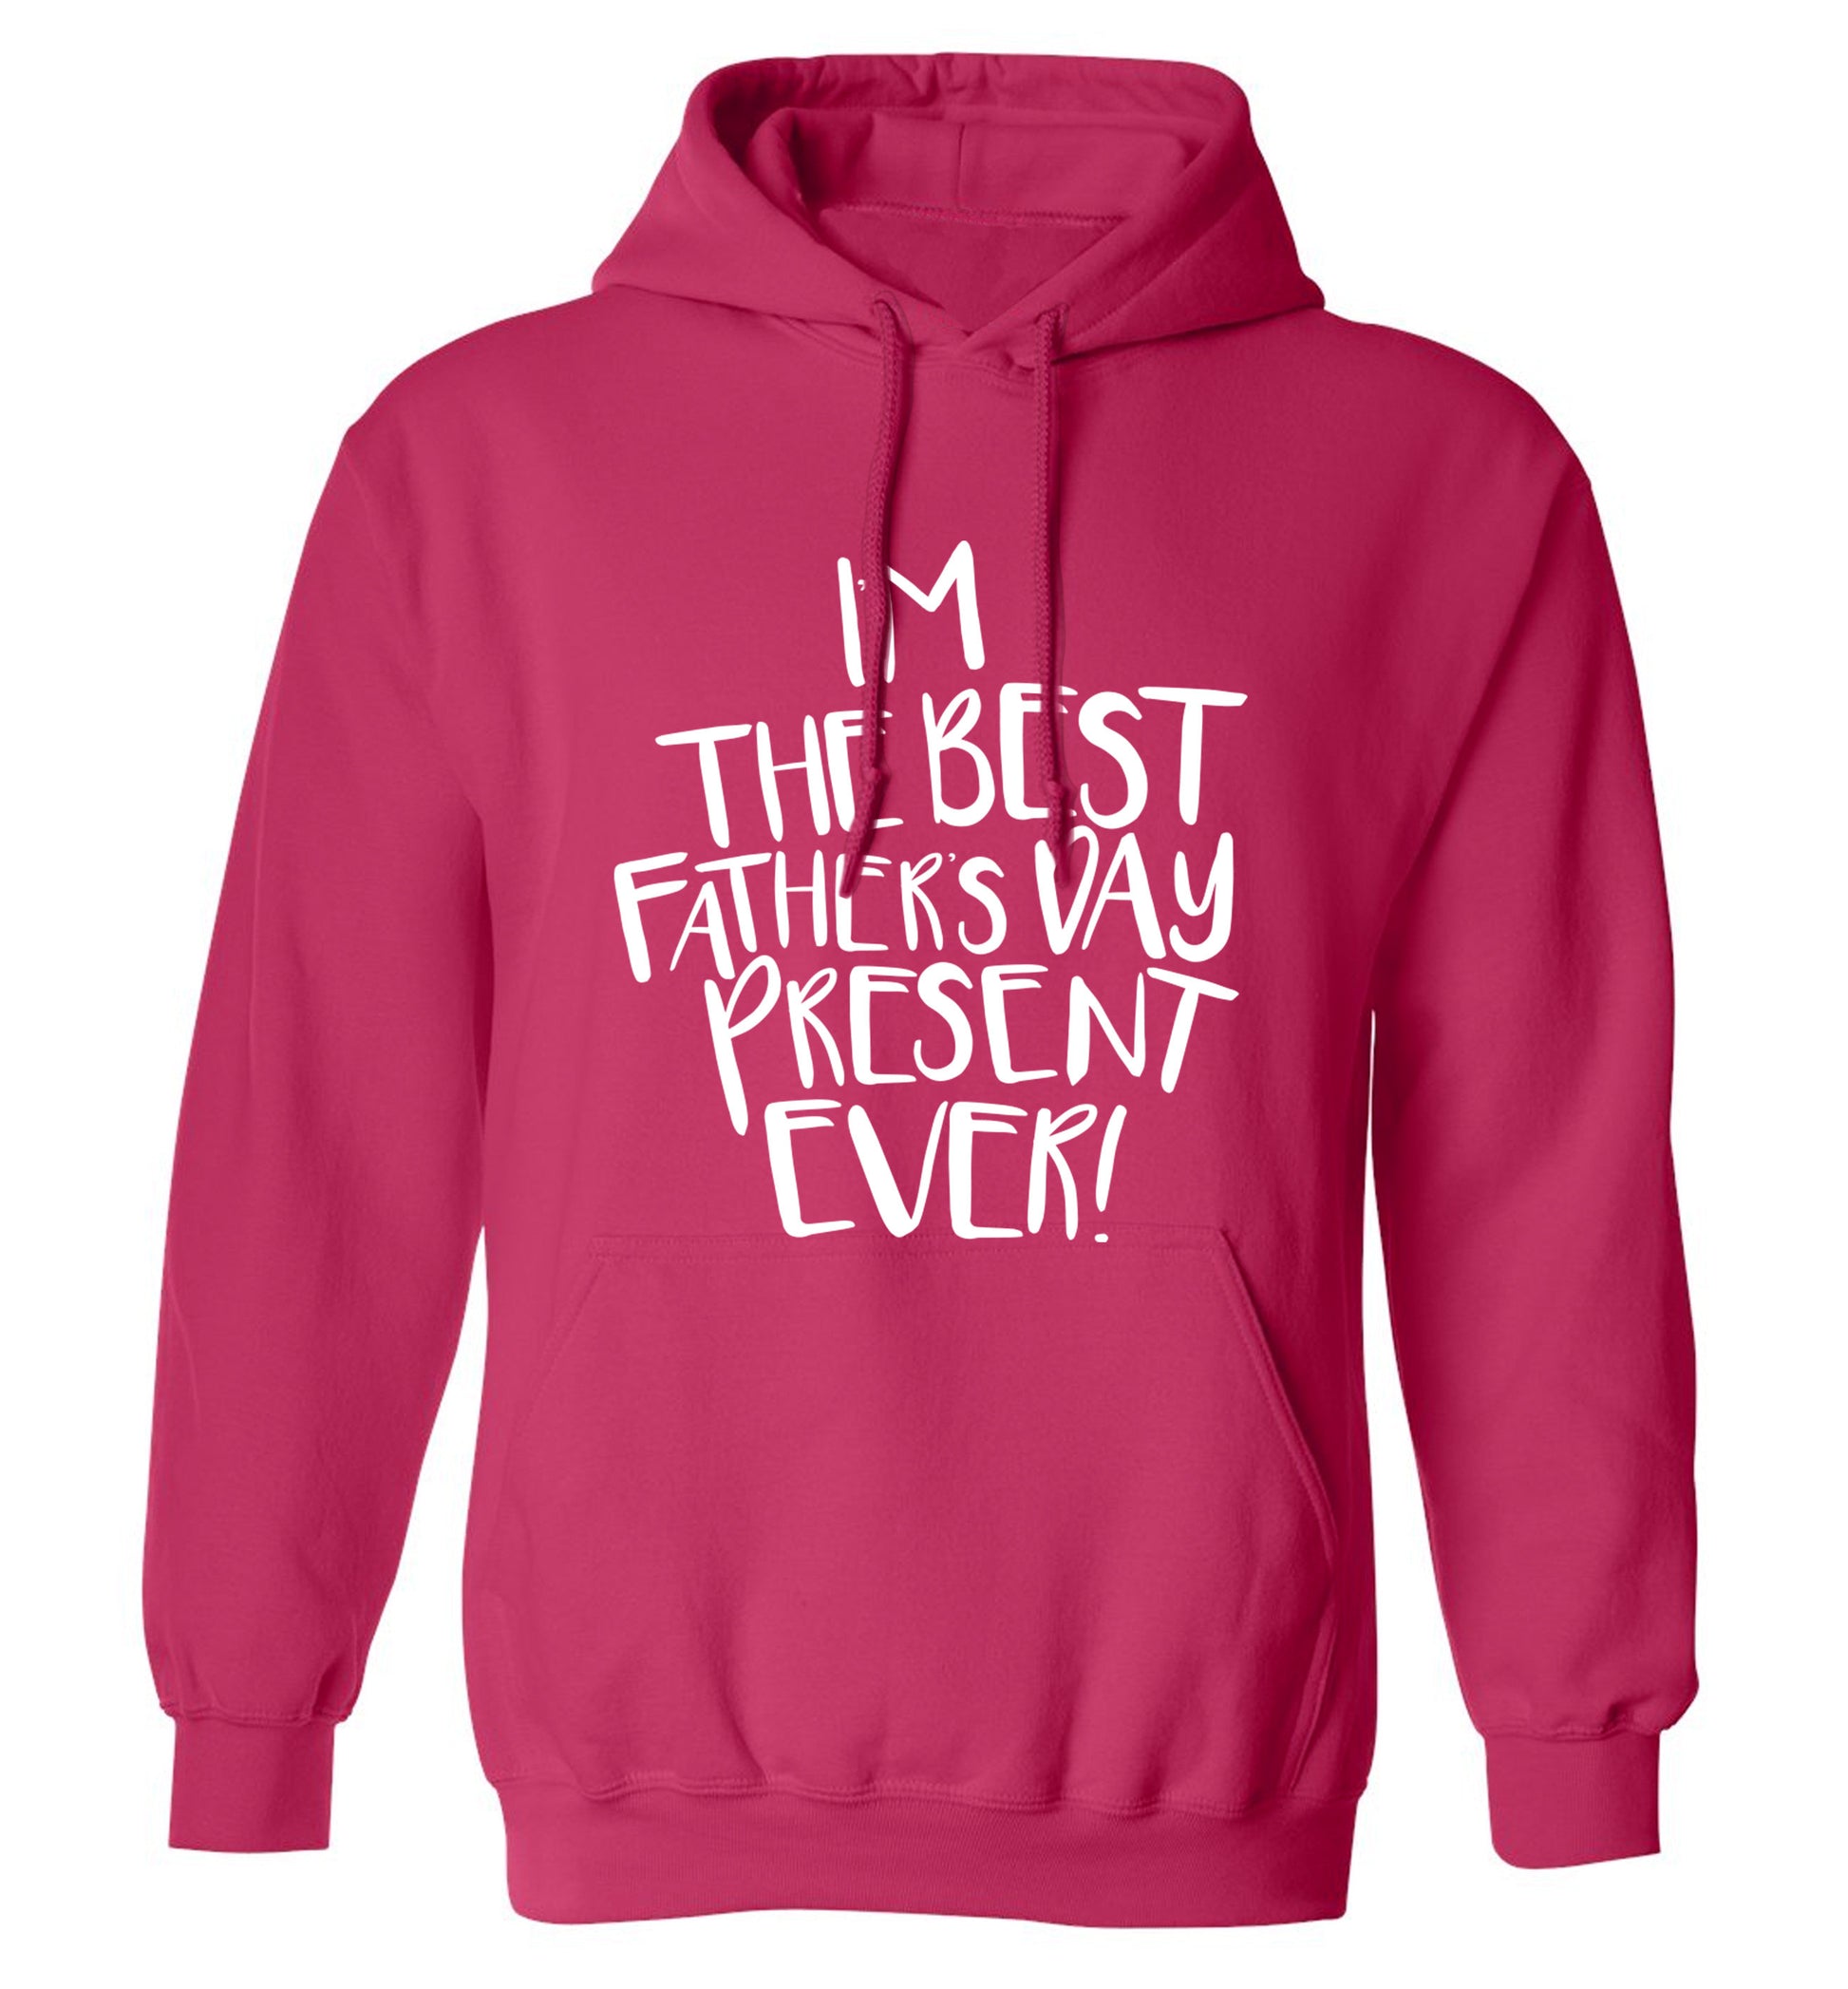 I'm the best father's day present ever! adults unisex pink hoodie 2XL